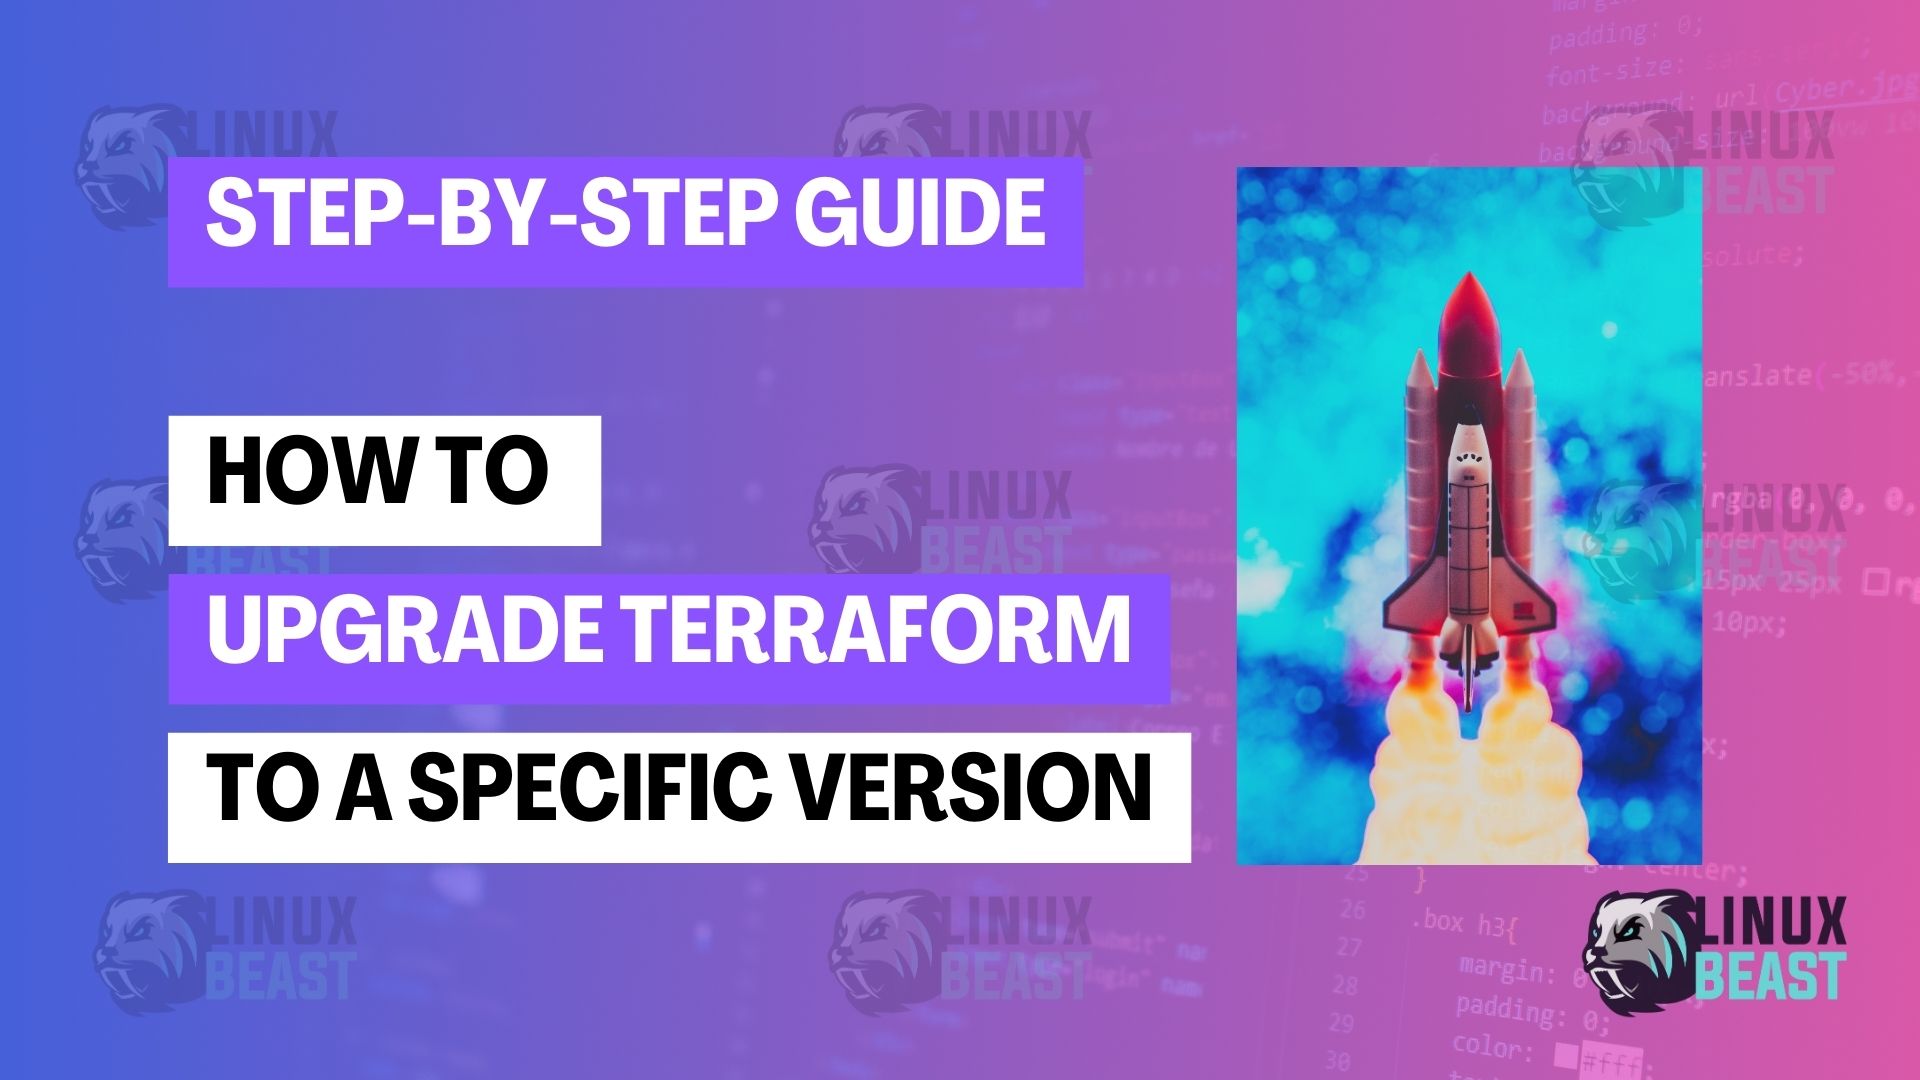 How to Upgrade Terraform to a Specific Version